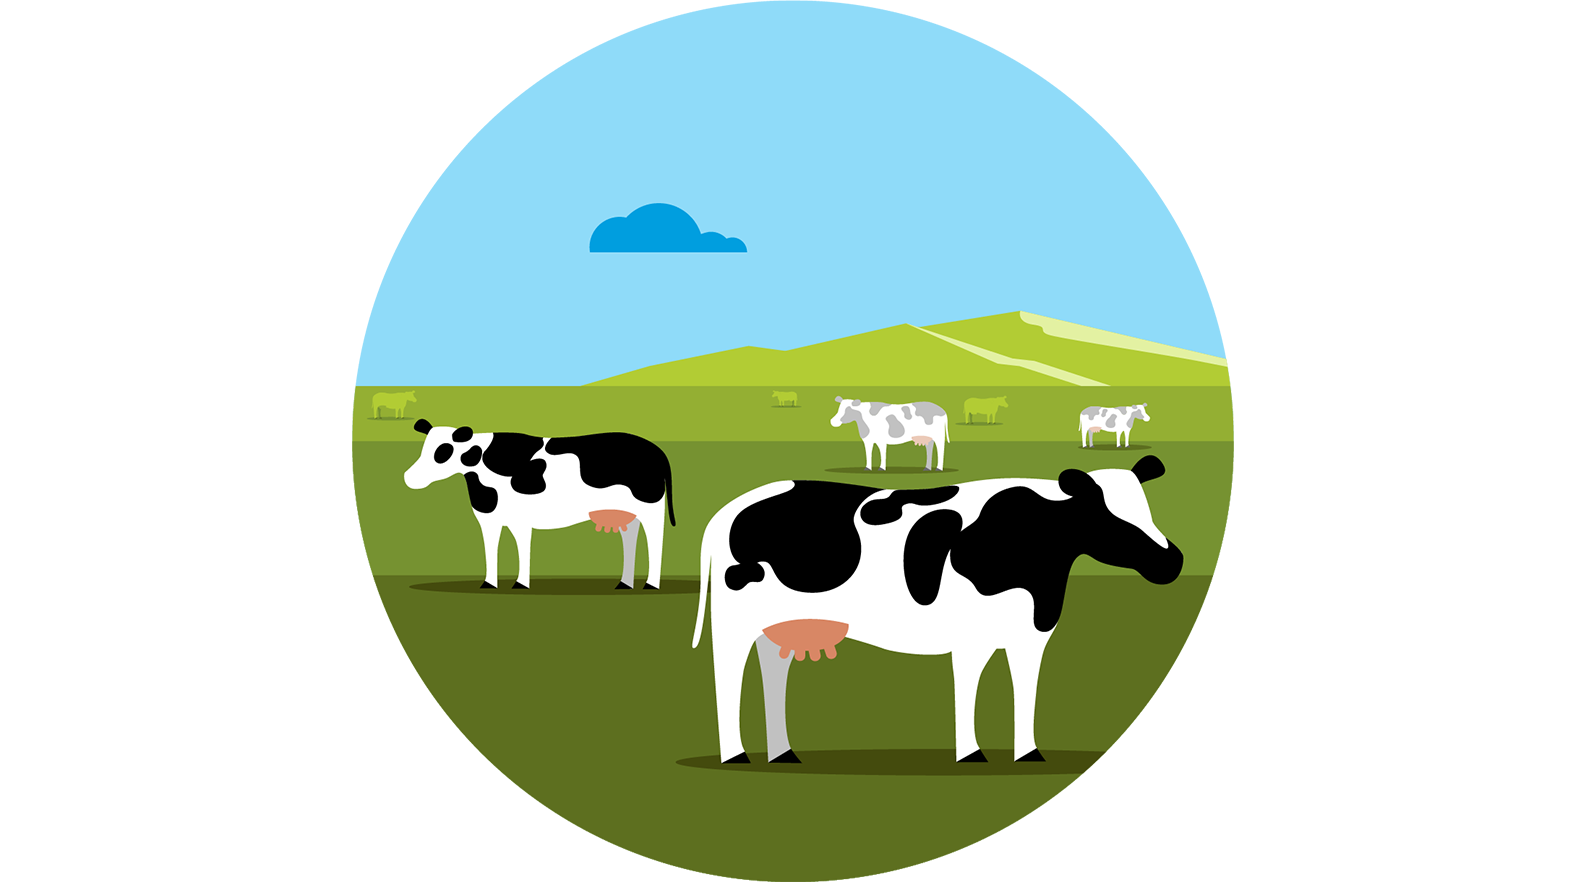 whey renewable natural gas matters - illustration of cows